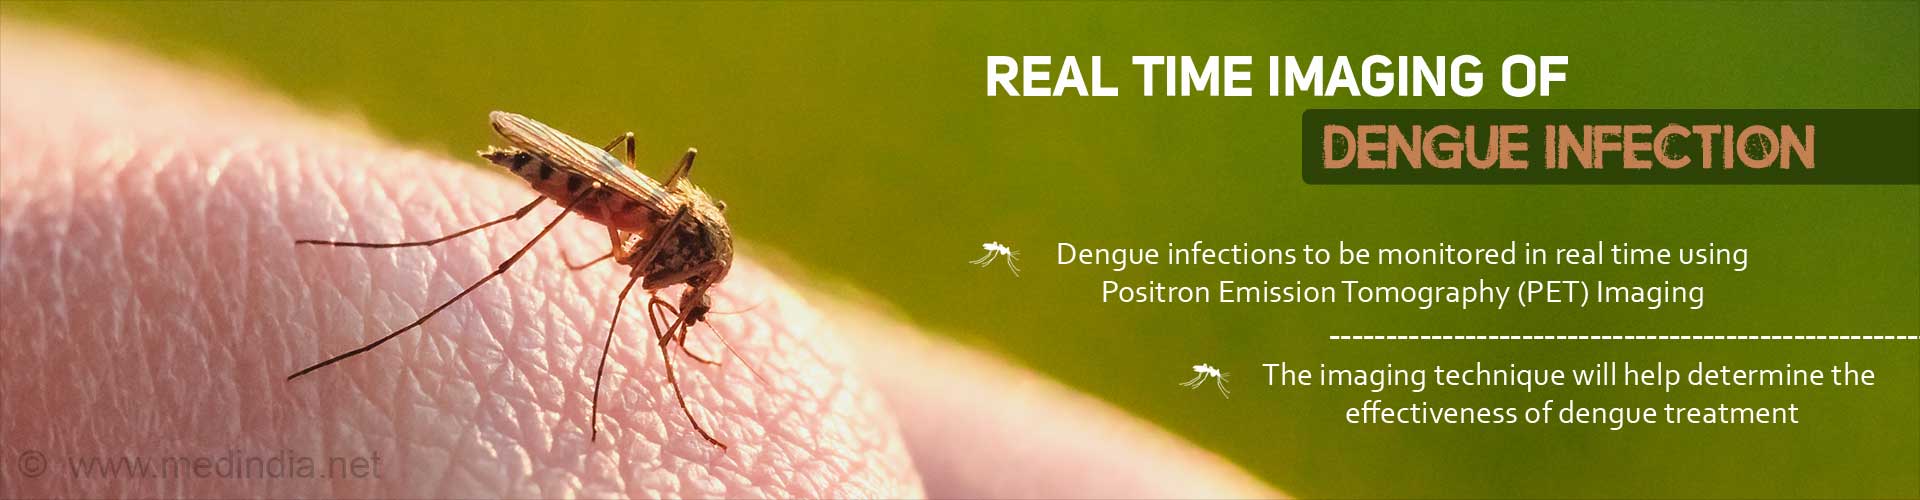 Real time imaging of dengue infection
- Dengue infections to be monitored in real time using Positron Emission Tomography (PET) Imaging
- The imaging technique will help determine the effectiveness of dengue treatment